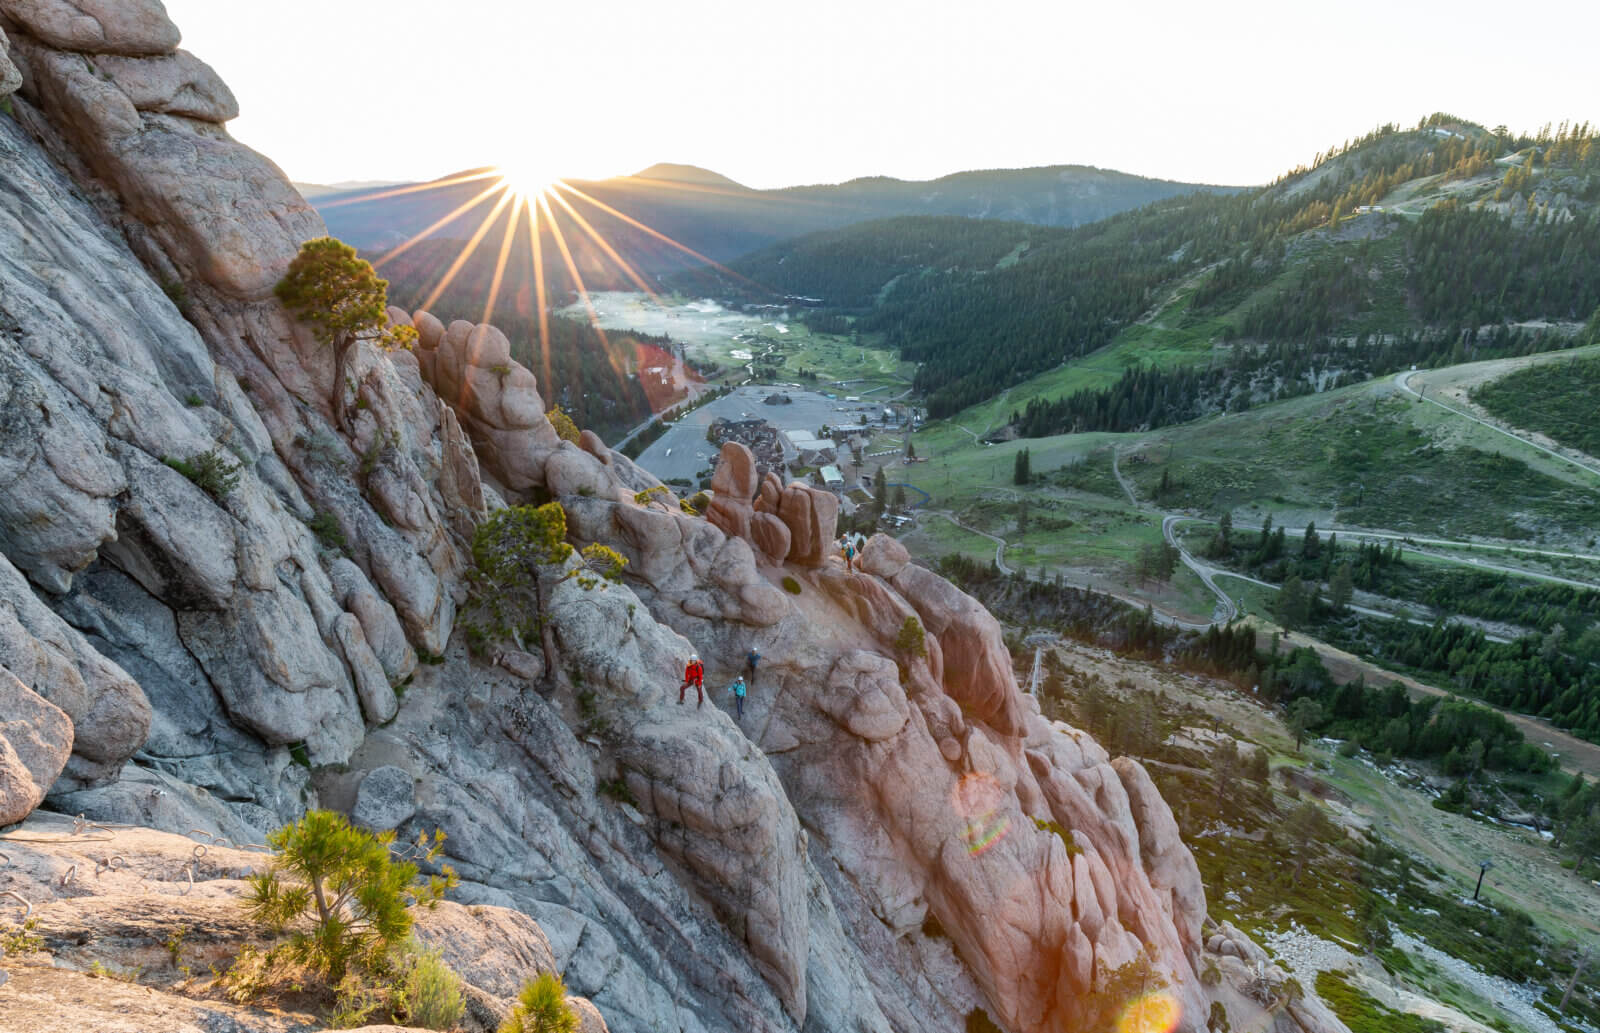 A group of climbers on the Tahoe Via Ferrata at Palisades Tahoe during sunrise. One of the best Lake Tahoe adventures!